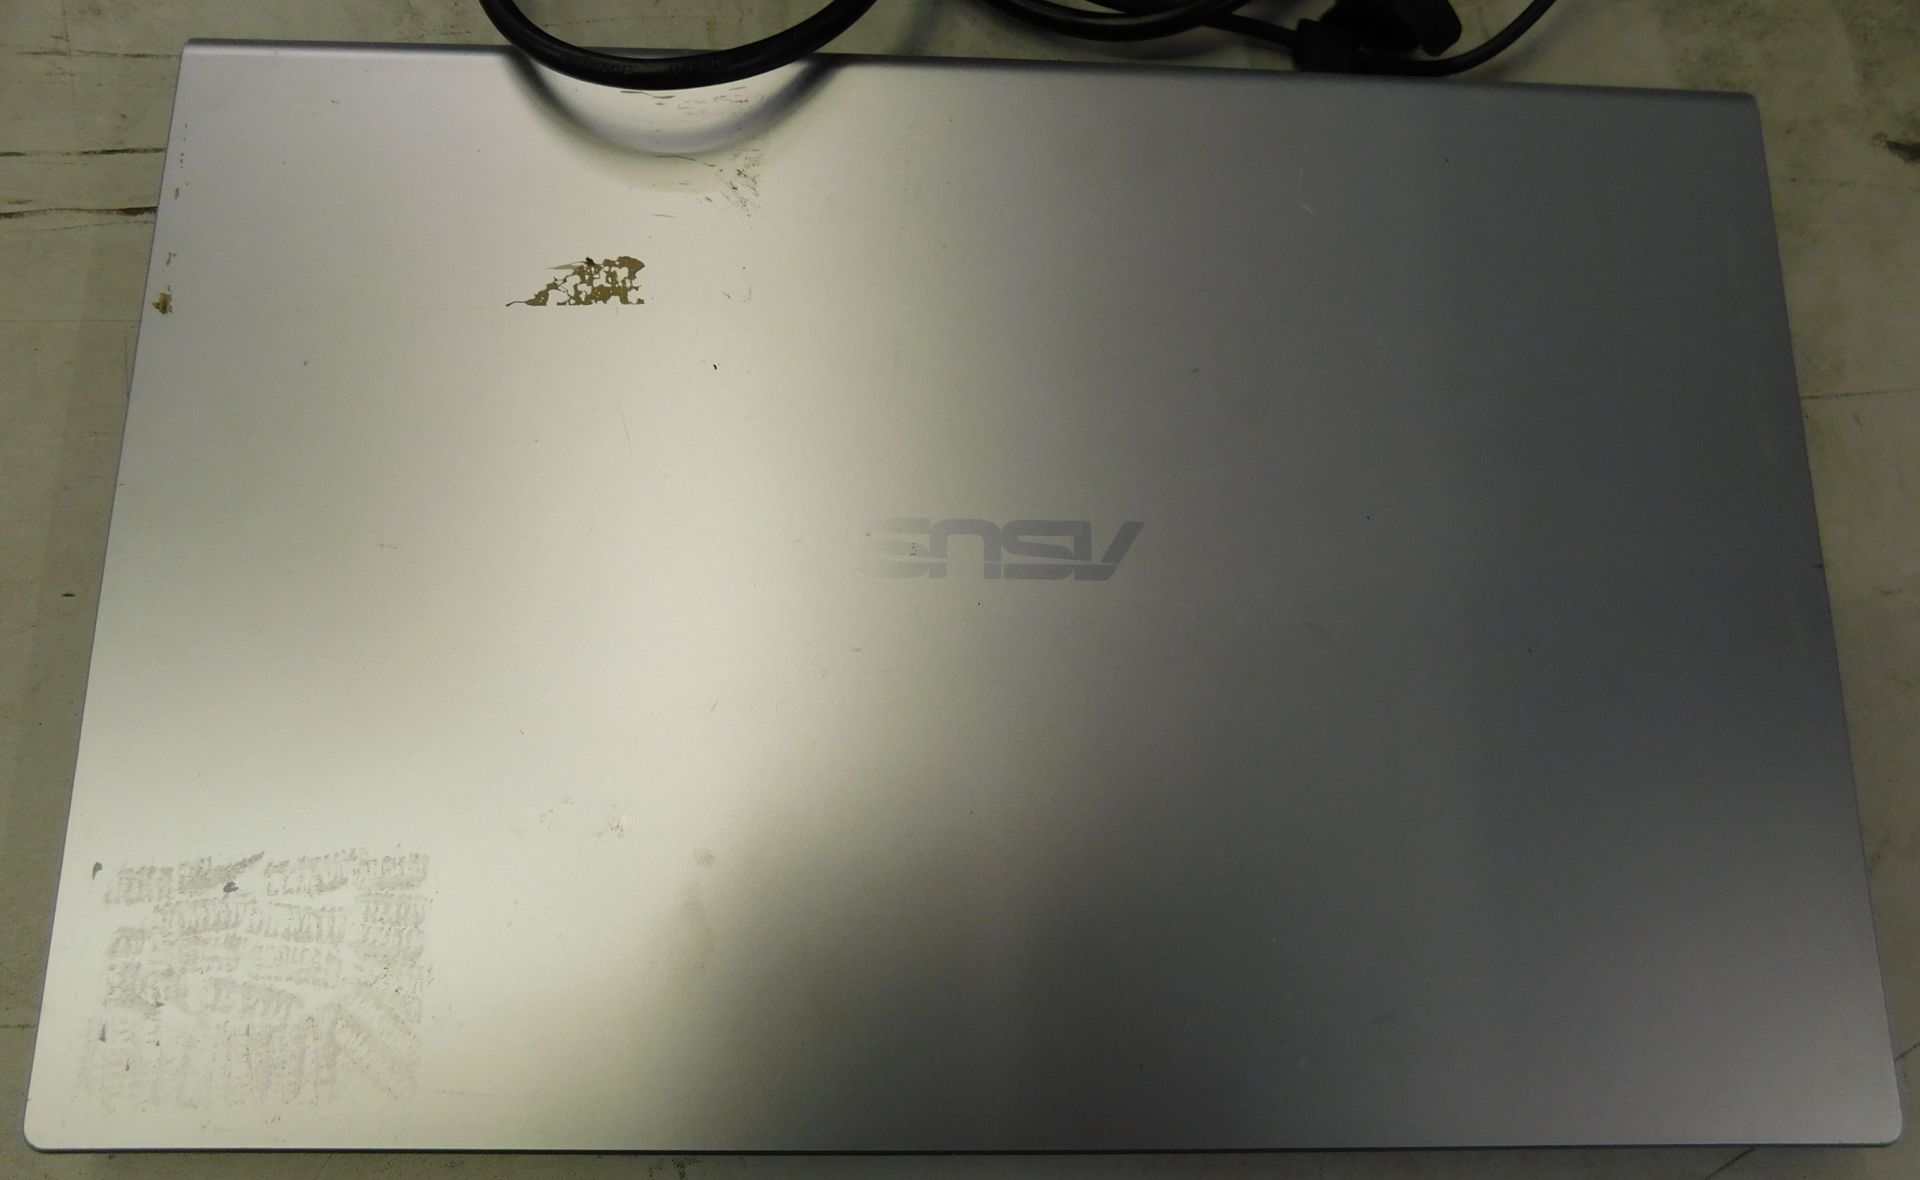 Asus X515J Laptop (No HDD) (Location: Stockport. Please Refer to General Notes) - Image 3 of 4